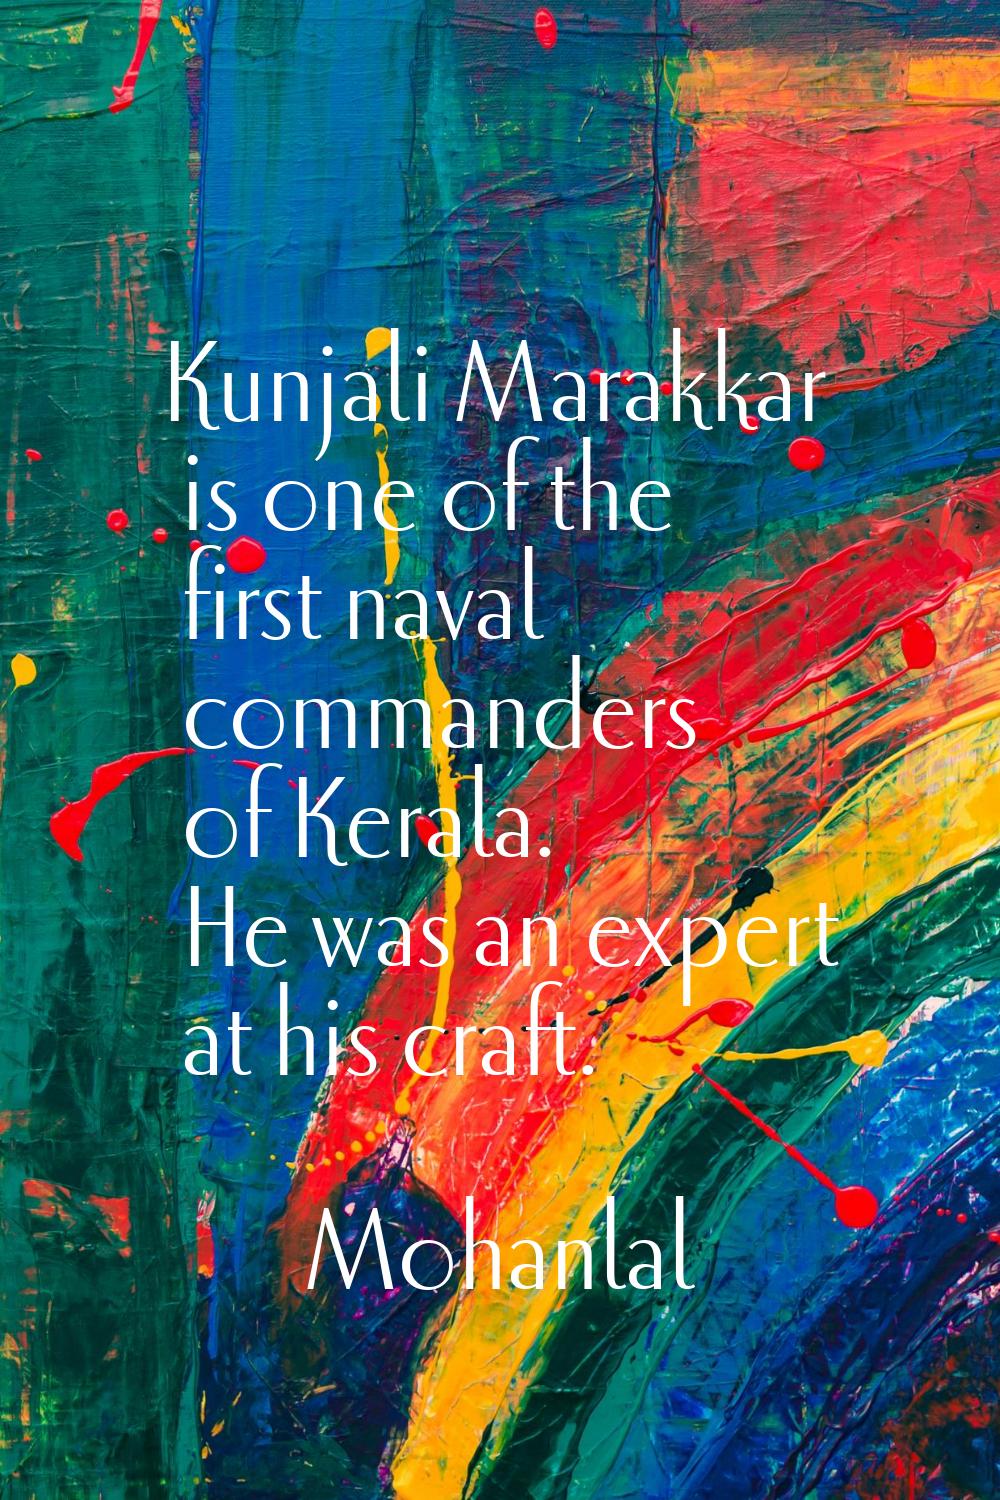 Kunjali Marakkar is one of the first naval commanders of Kerala. He was an expert at his craft.